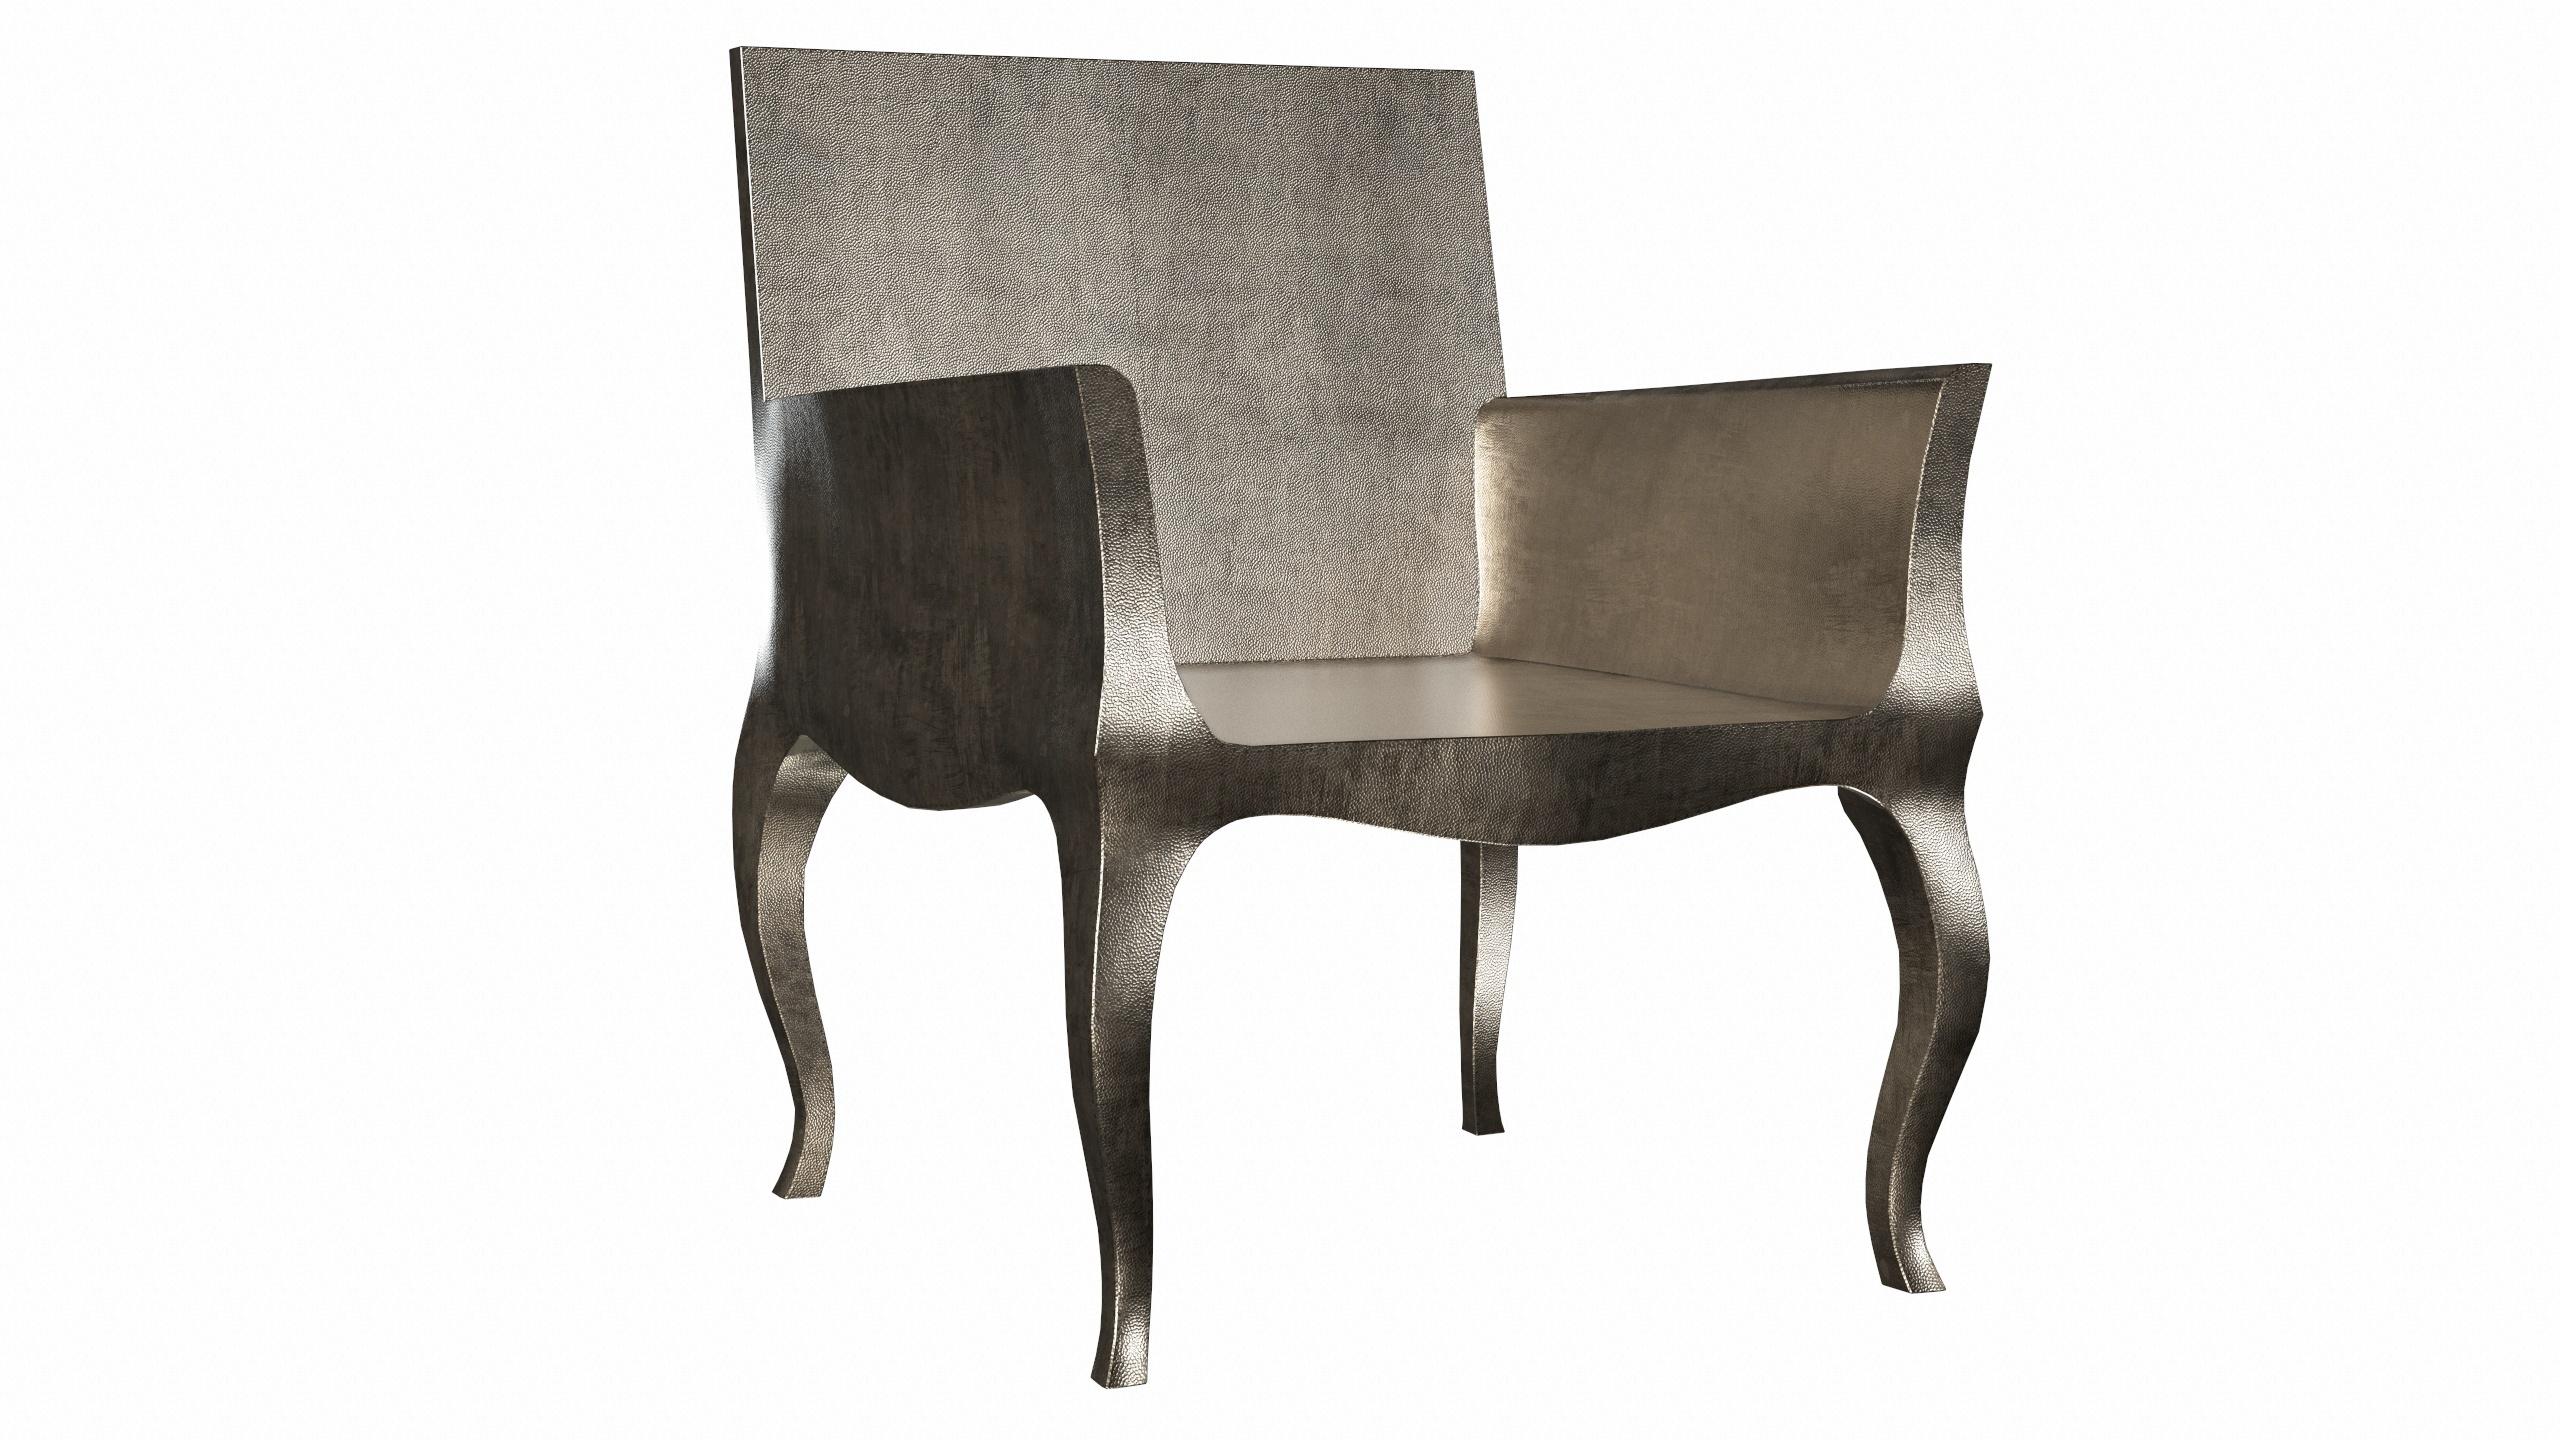 Contemporary Art Deco Dining Room Chairs Mid Hammered in Antique Bronze by Paul Mathieu For Sale